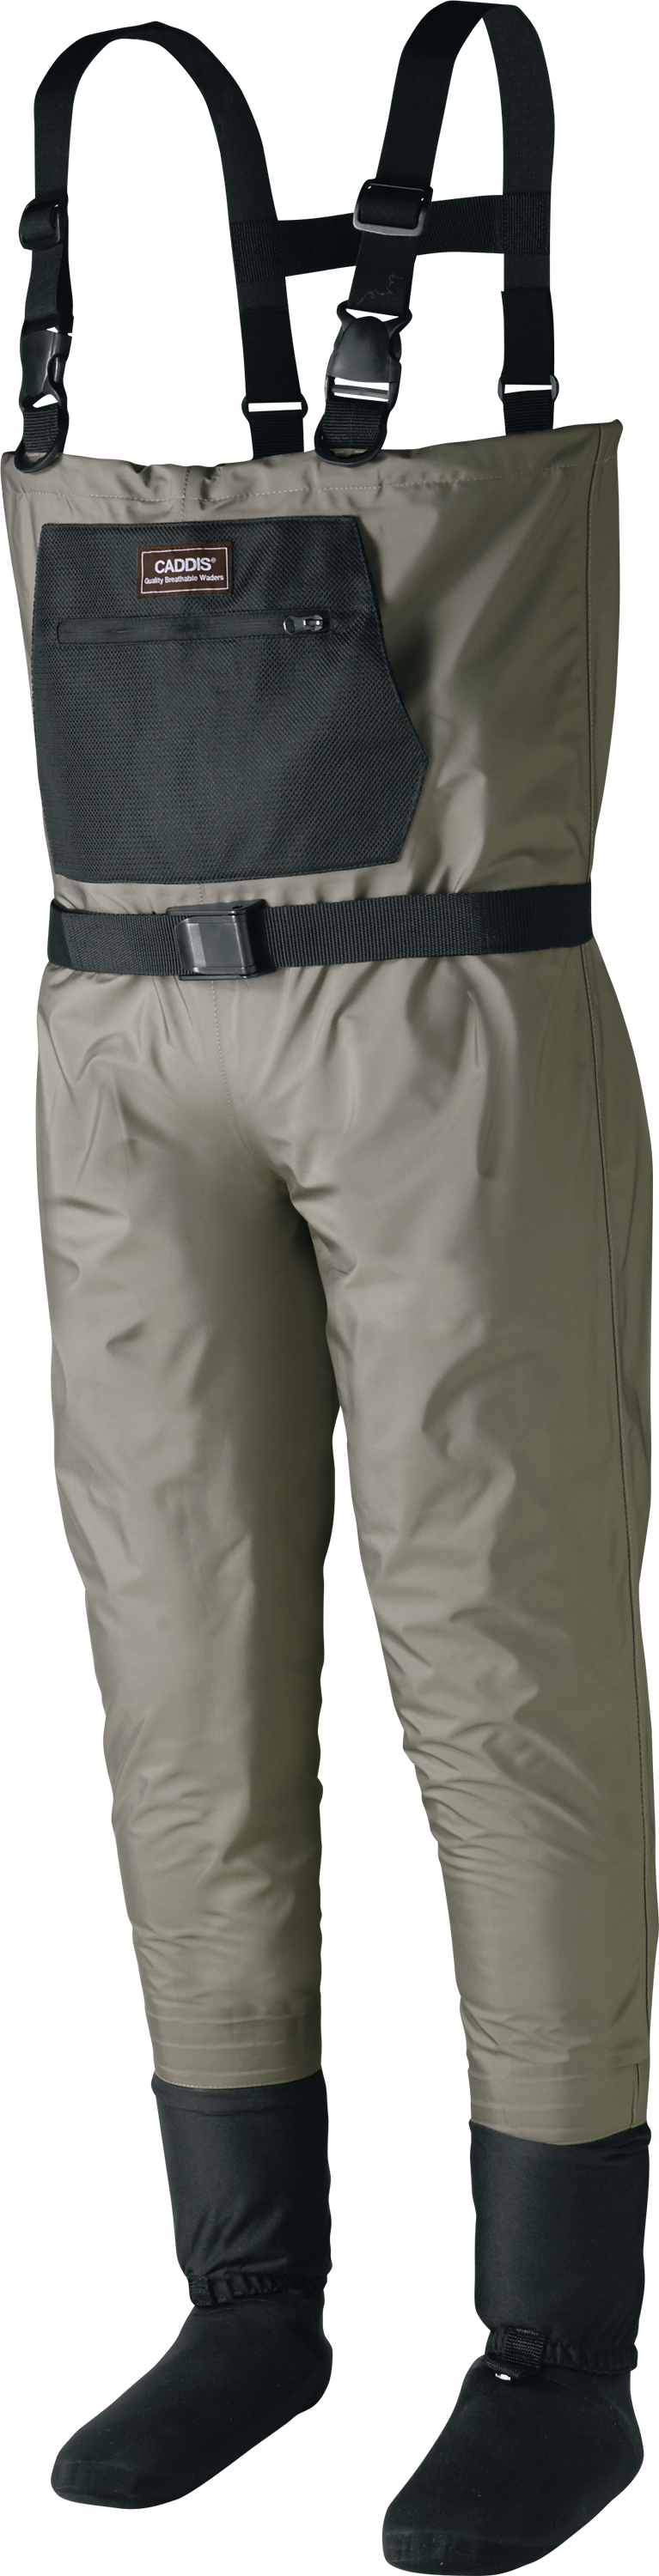 Caddis Breathable Stockingfoot Fishing Waders for Men - 2XL Stout